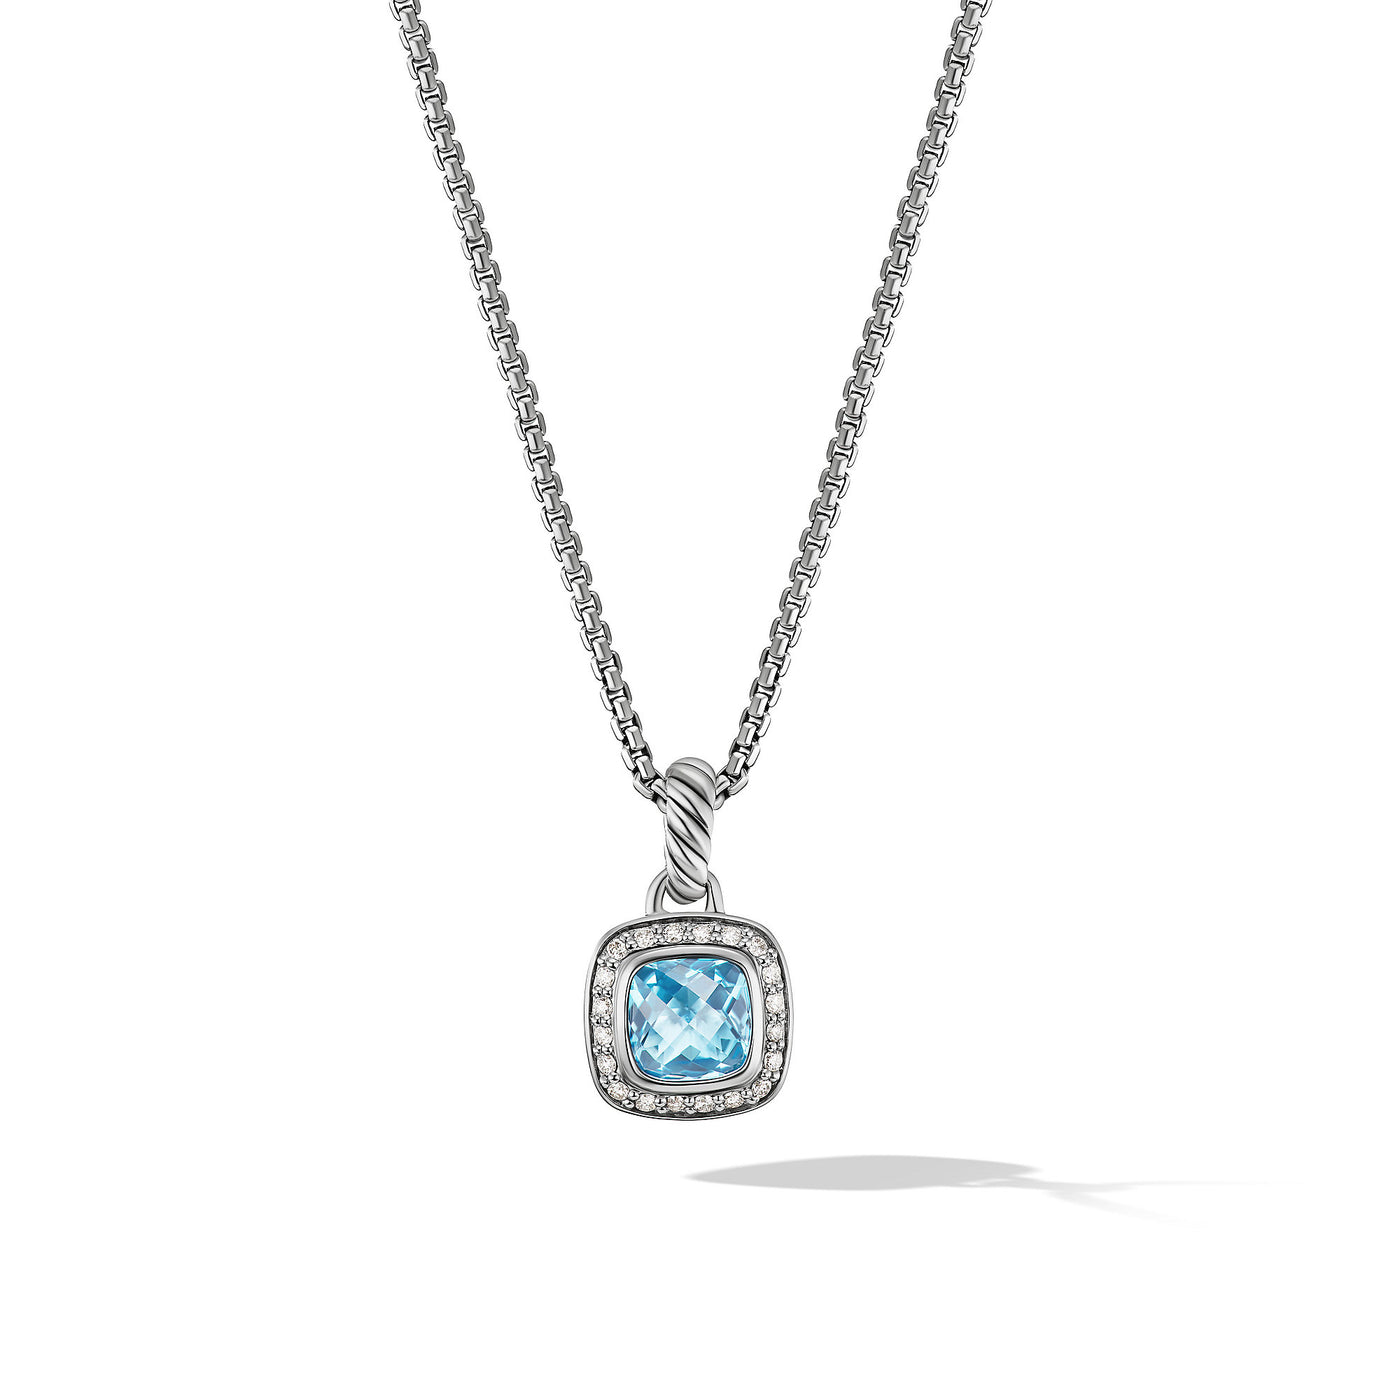 Petite Albion® Pendant Necklace in Sterling Silver with Blue Topaz and Diamonds\, 7mm